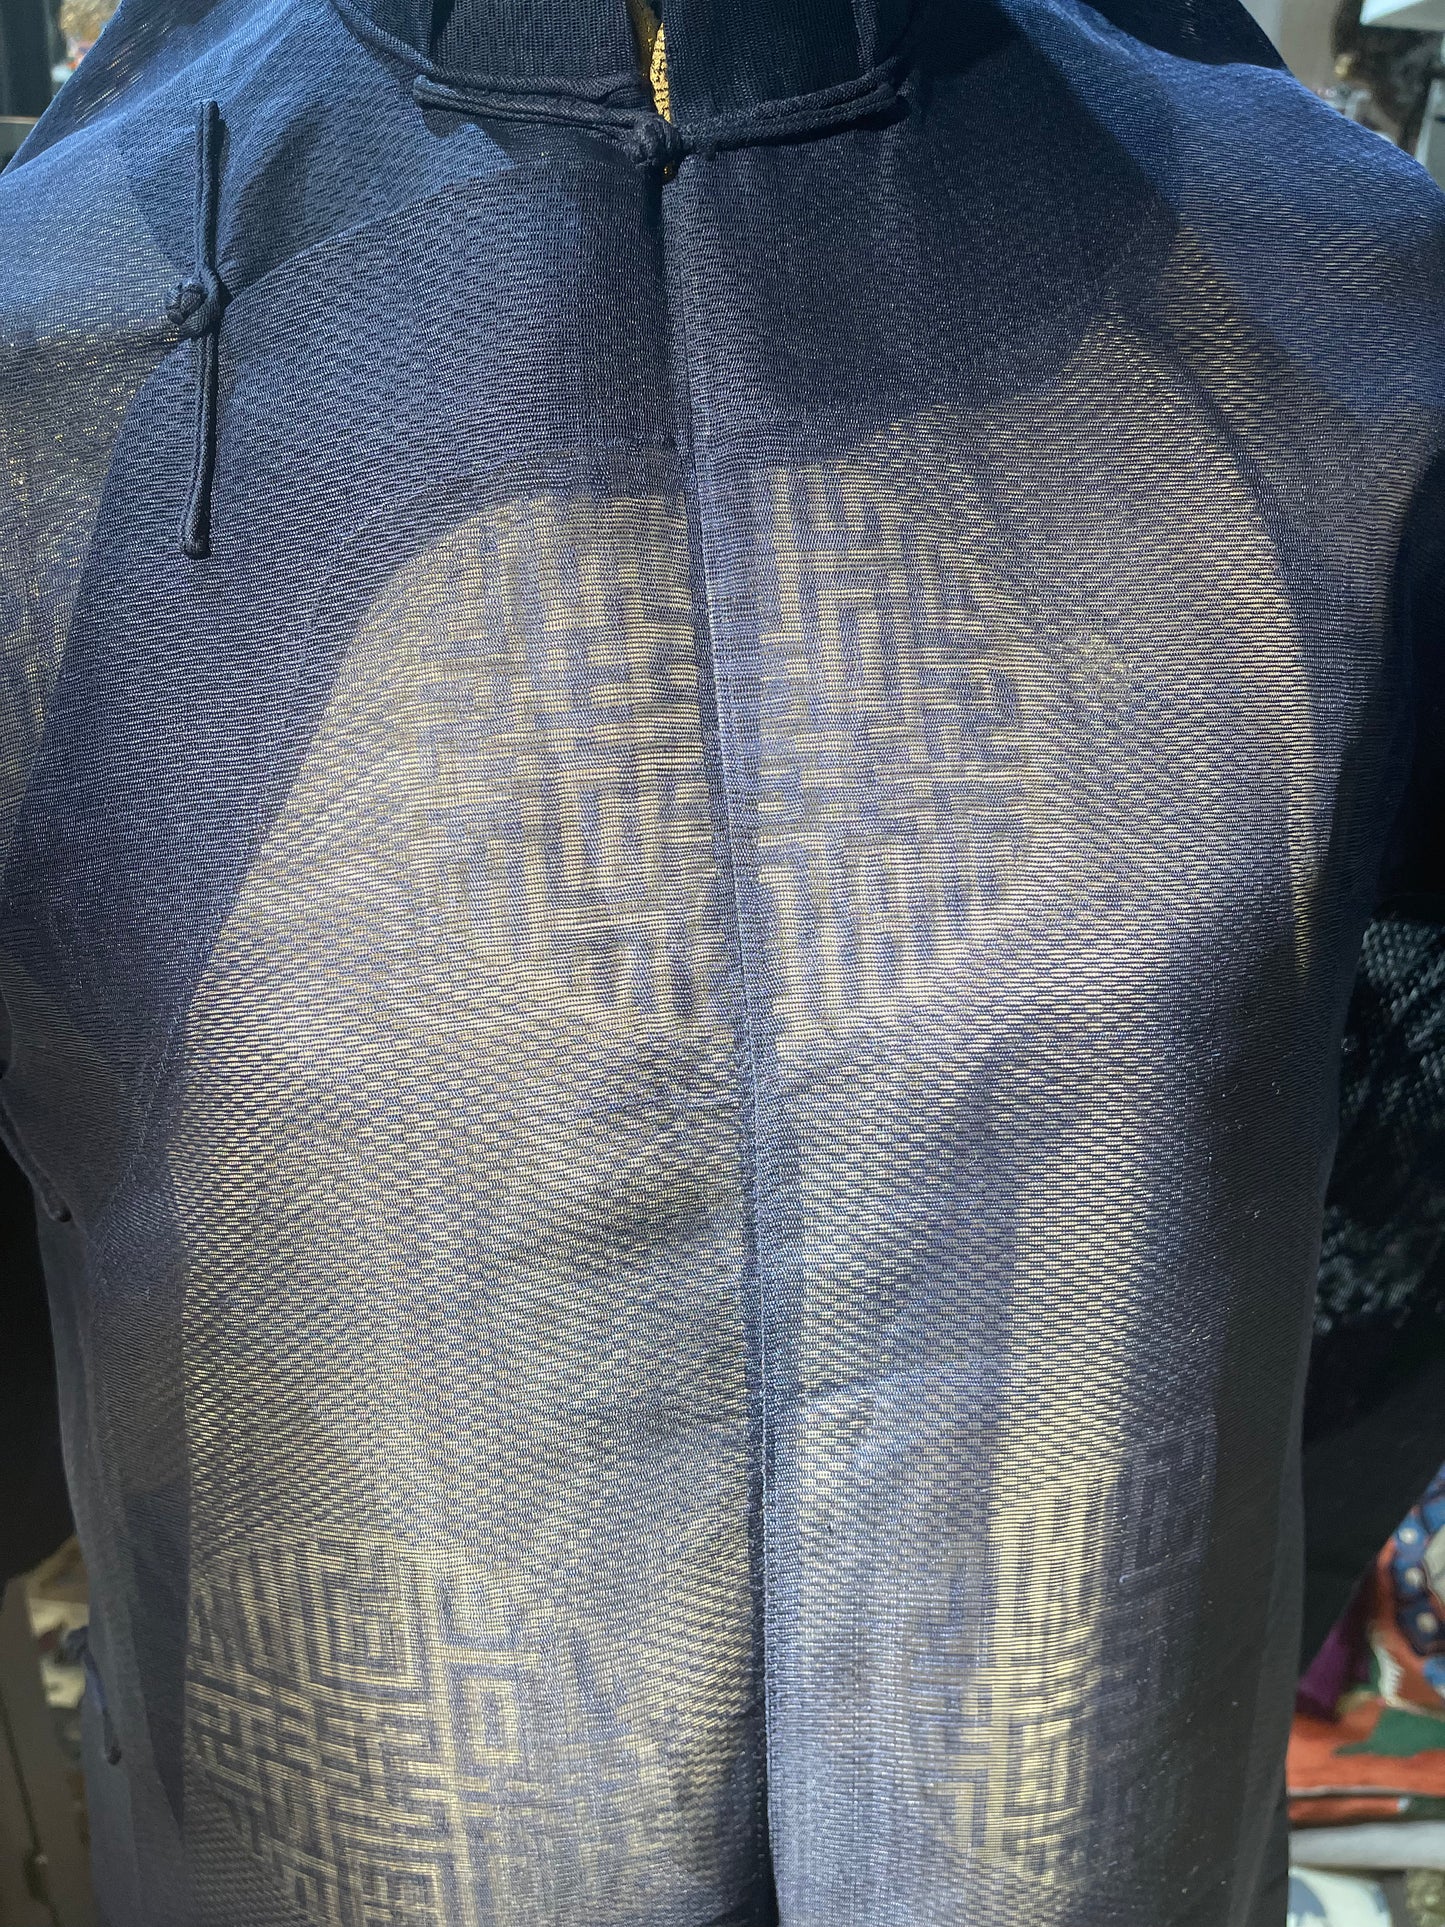 Antique see- through Chinese robe/ Dress made with antique Chinese silk gauze